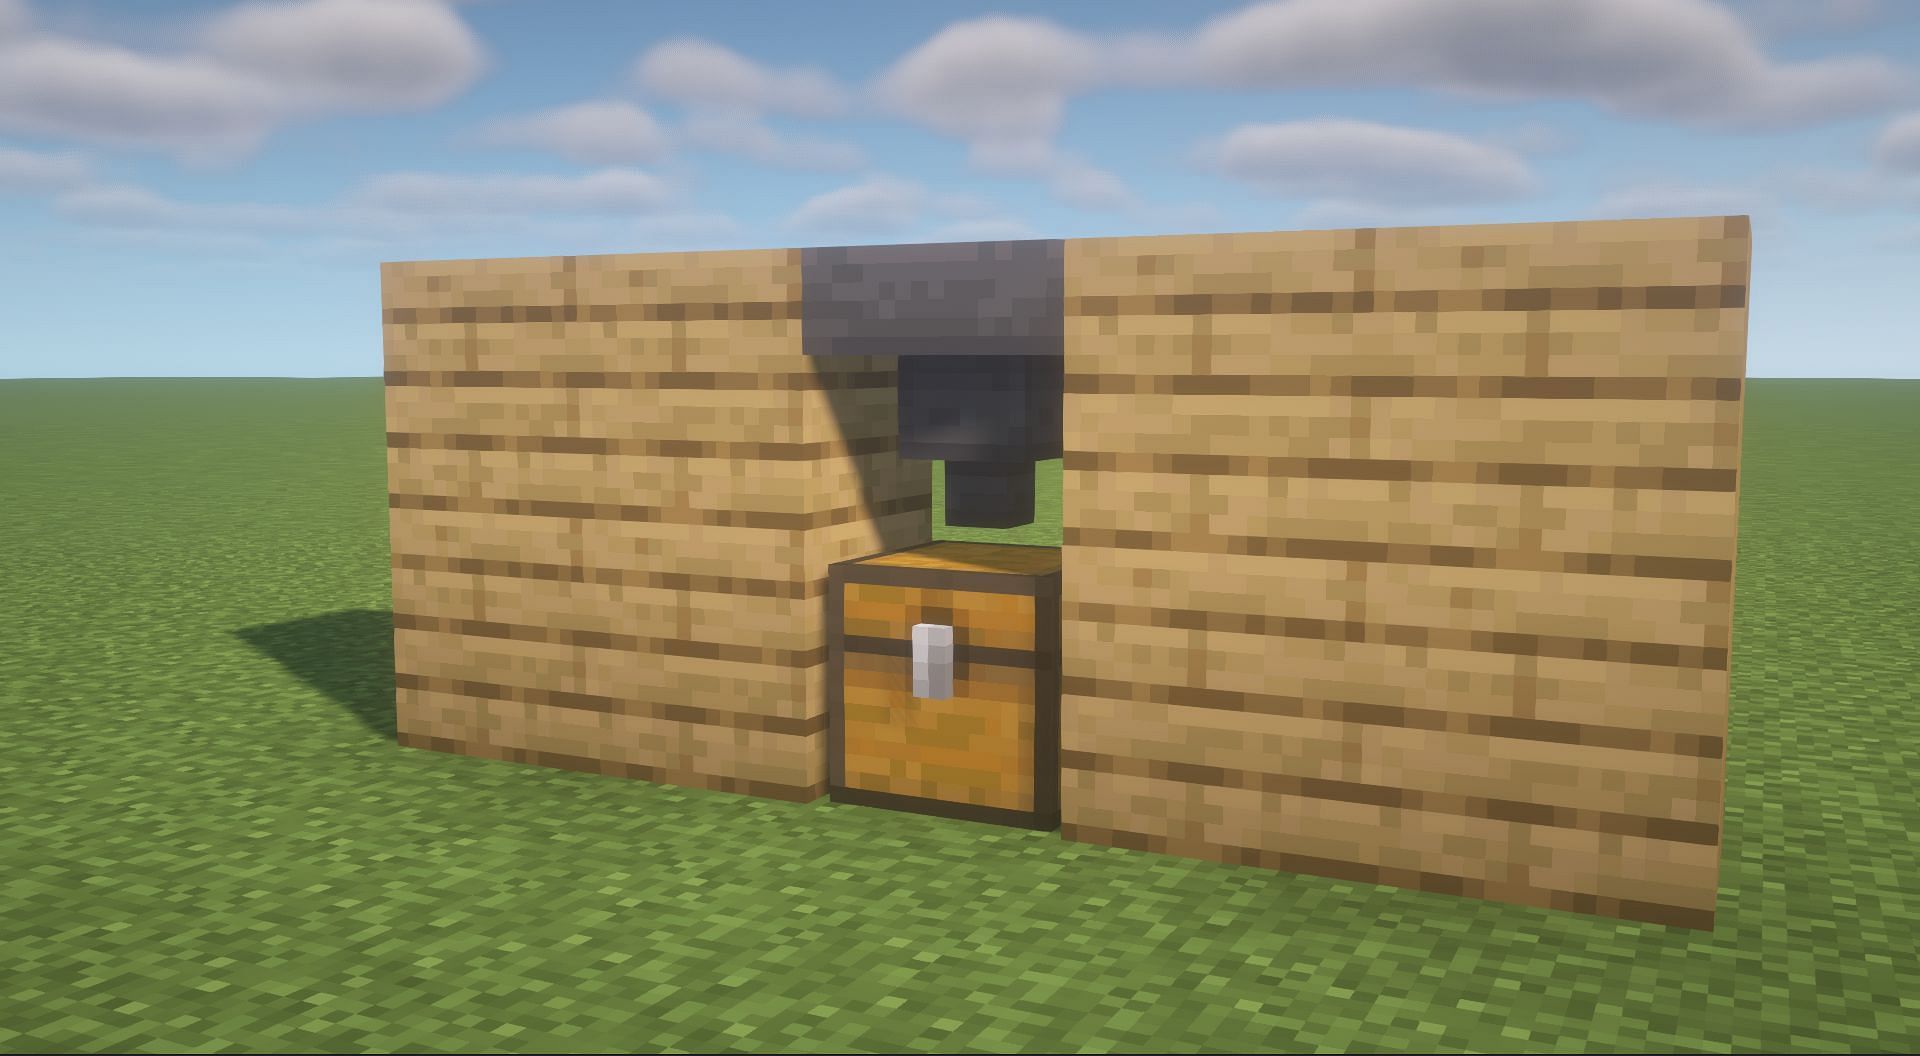 Bottom chest should be properly connected to the hopper (Image via Mojang)